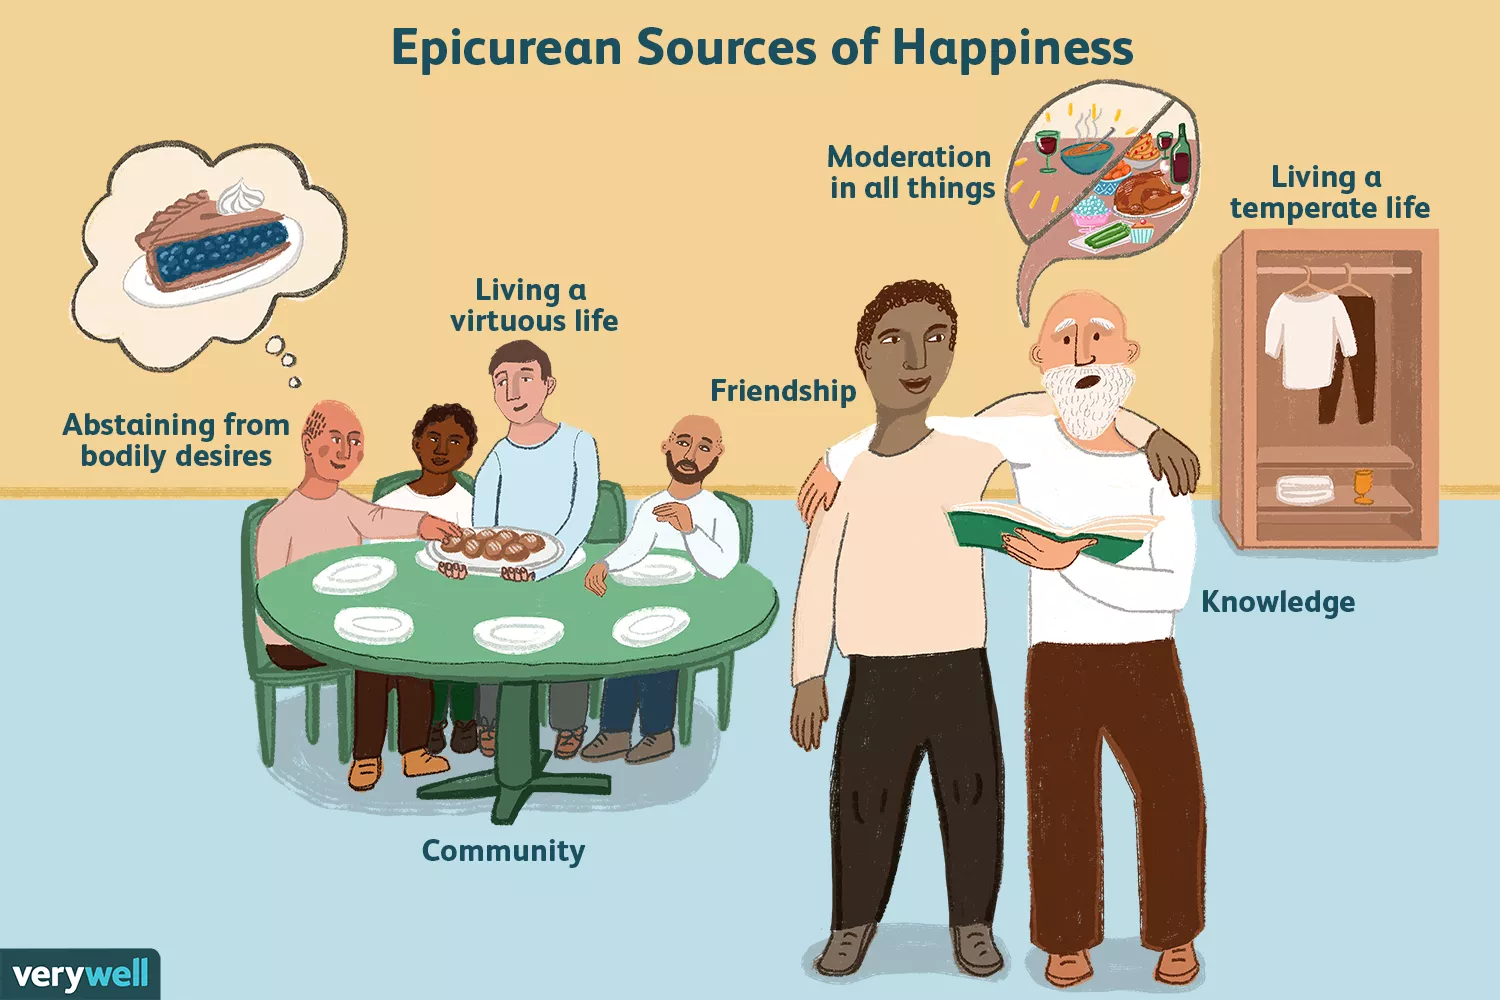 Epicurean Sources of Happiness